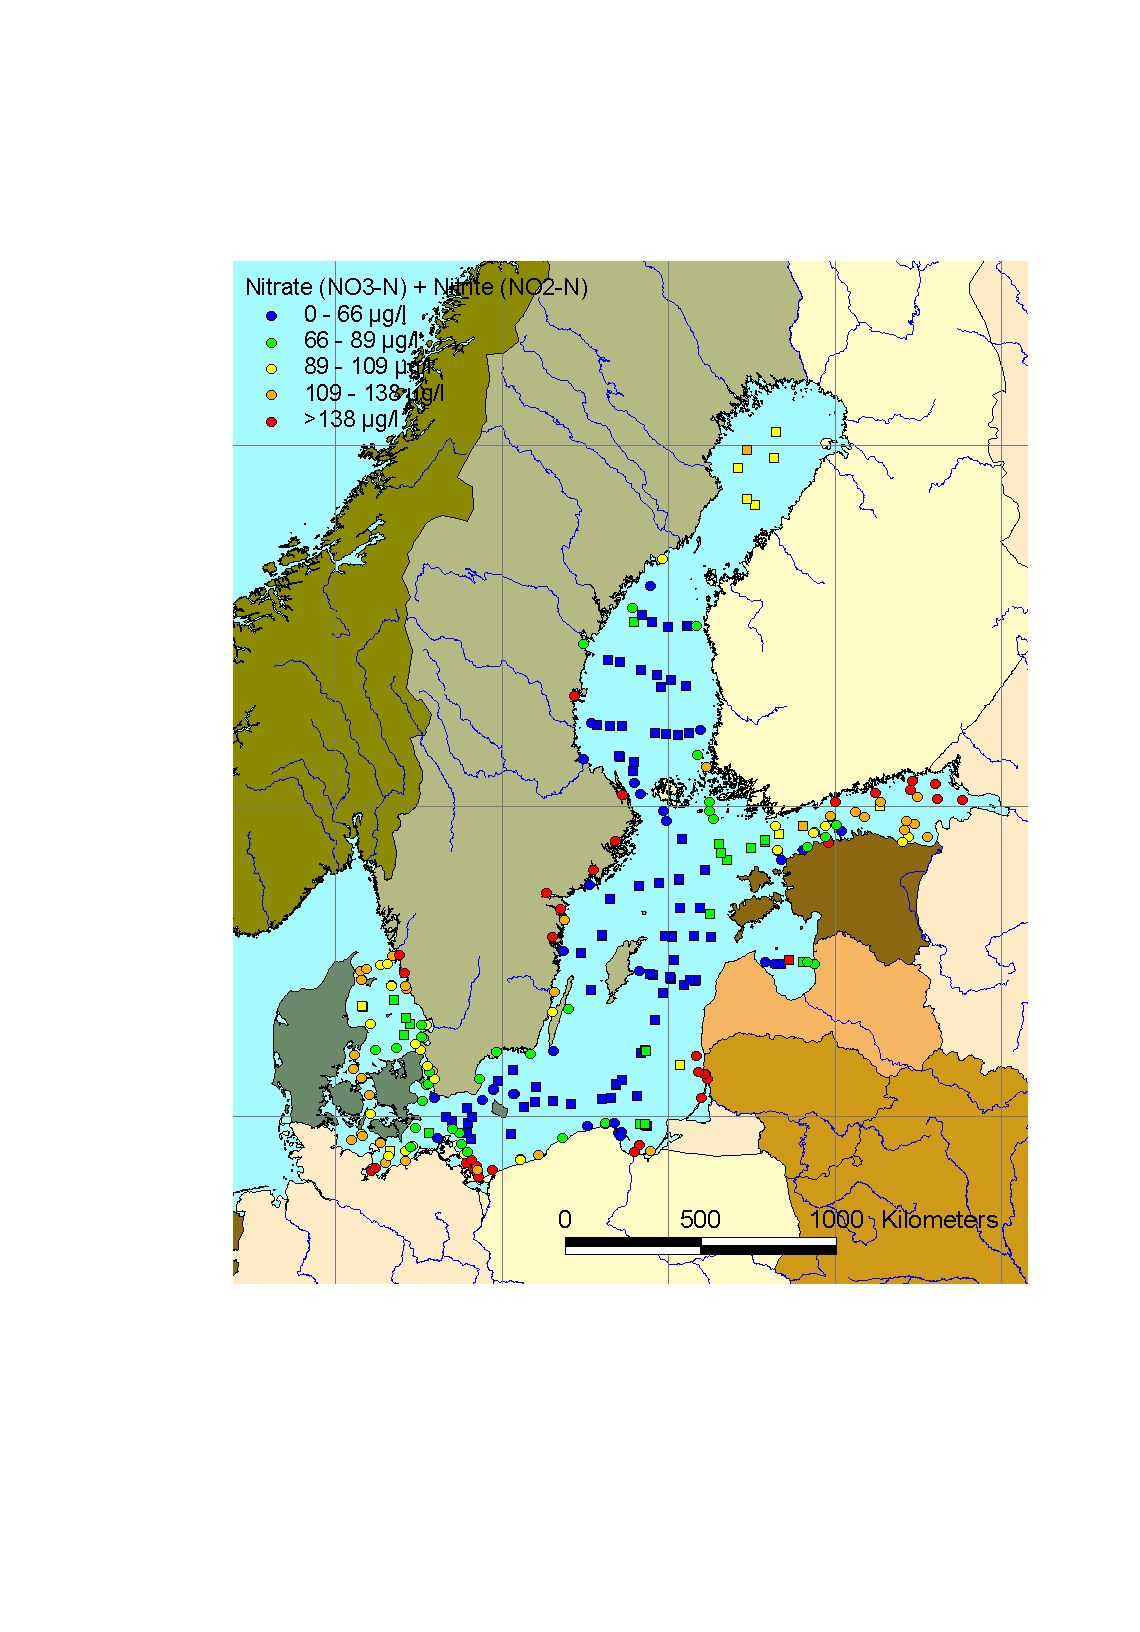 Mean winter surface concentrations of nitrate+nitrite in the Baltic Sea Area, 2003